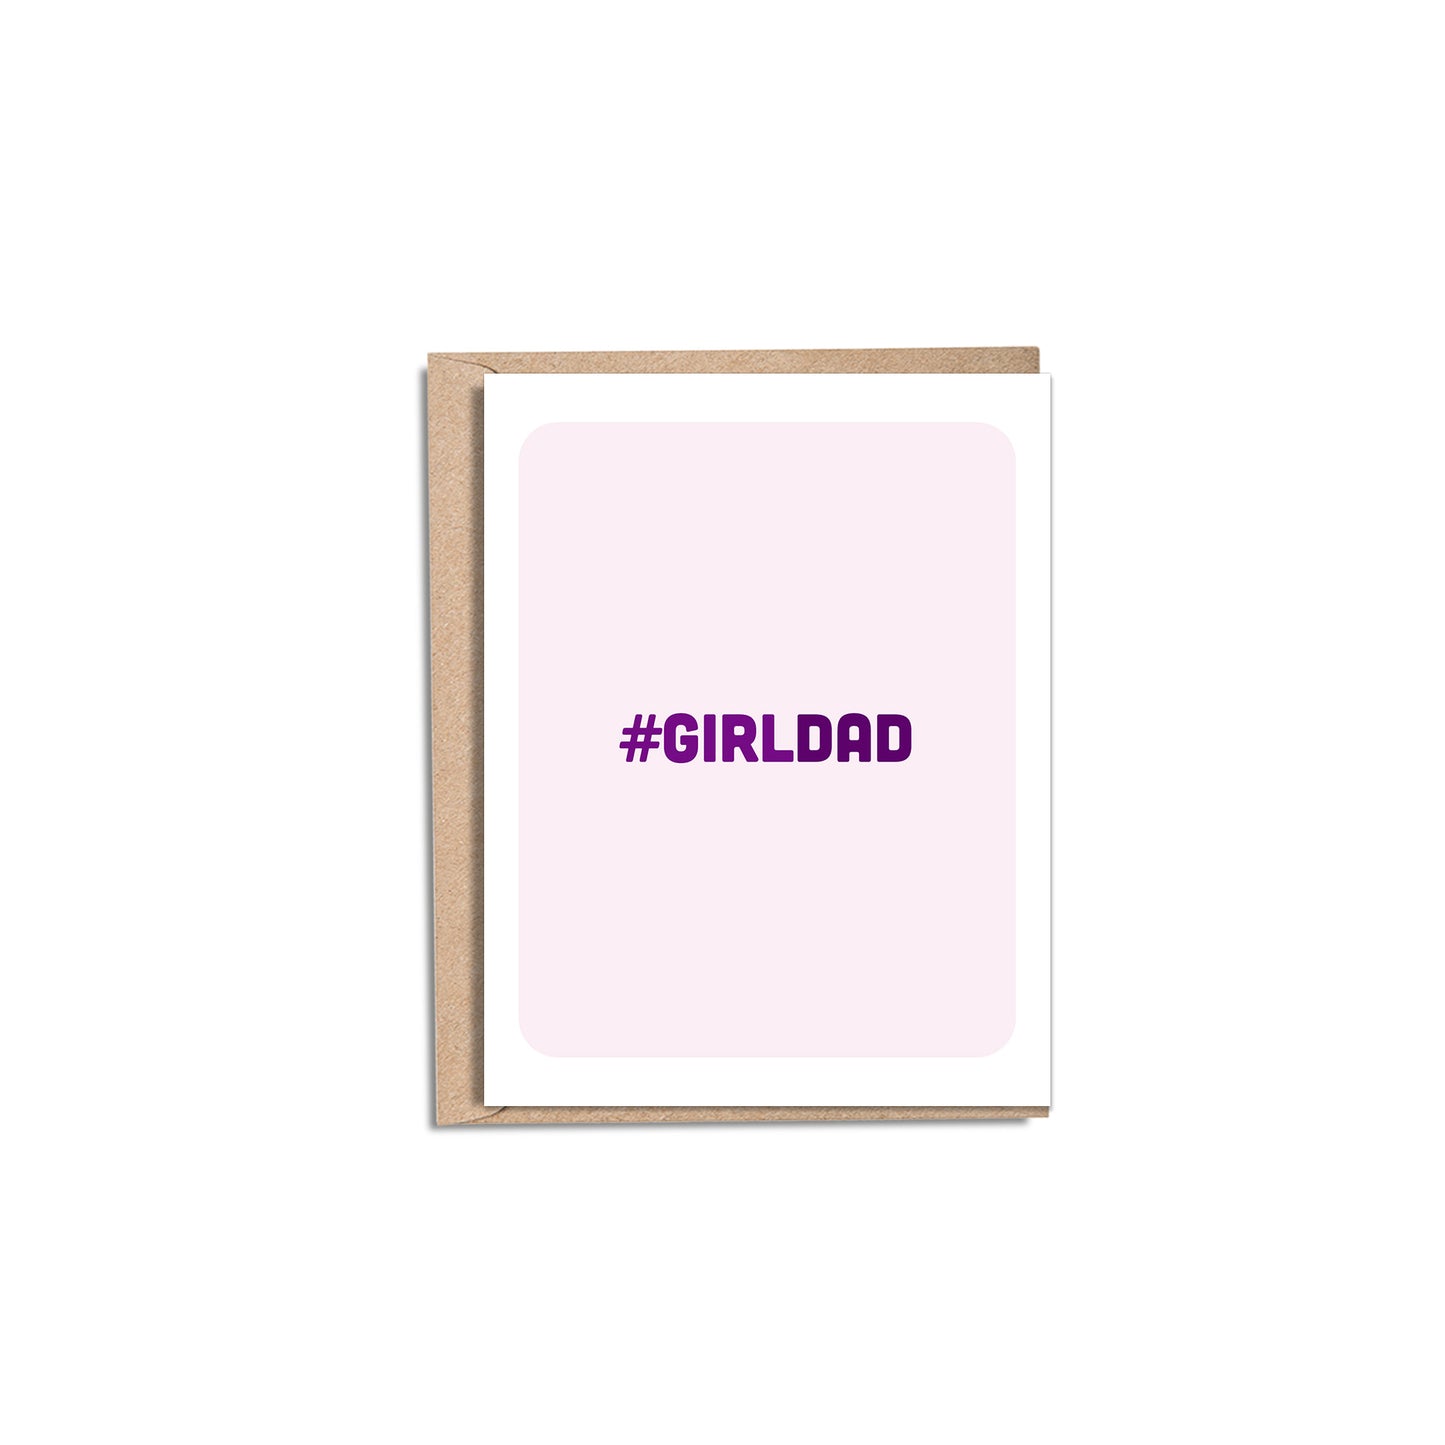 Girl Dad 4.25x5.5” A2 New parents, expecting dad, baby shower, fathers day greeting cards from Goods Made By Digitrillnana, Ashley Fletcher. Black Woman Owned. Perfect baby shower or dad card!